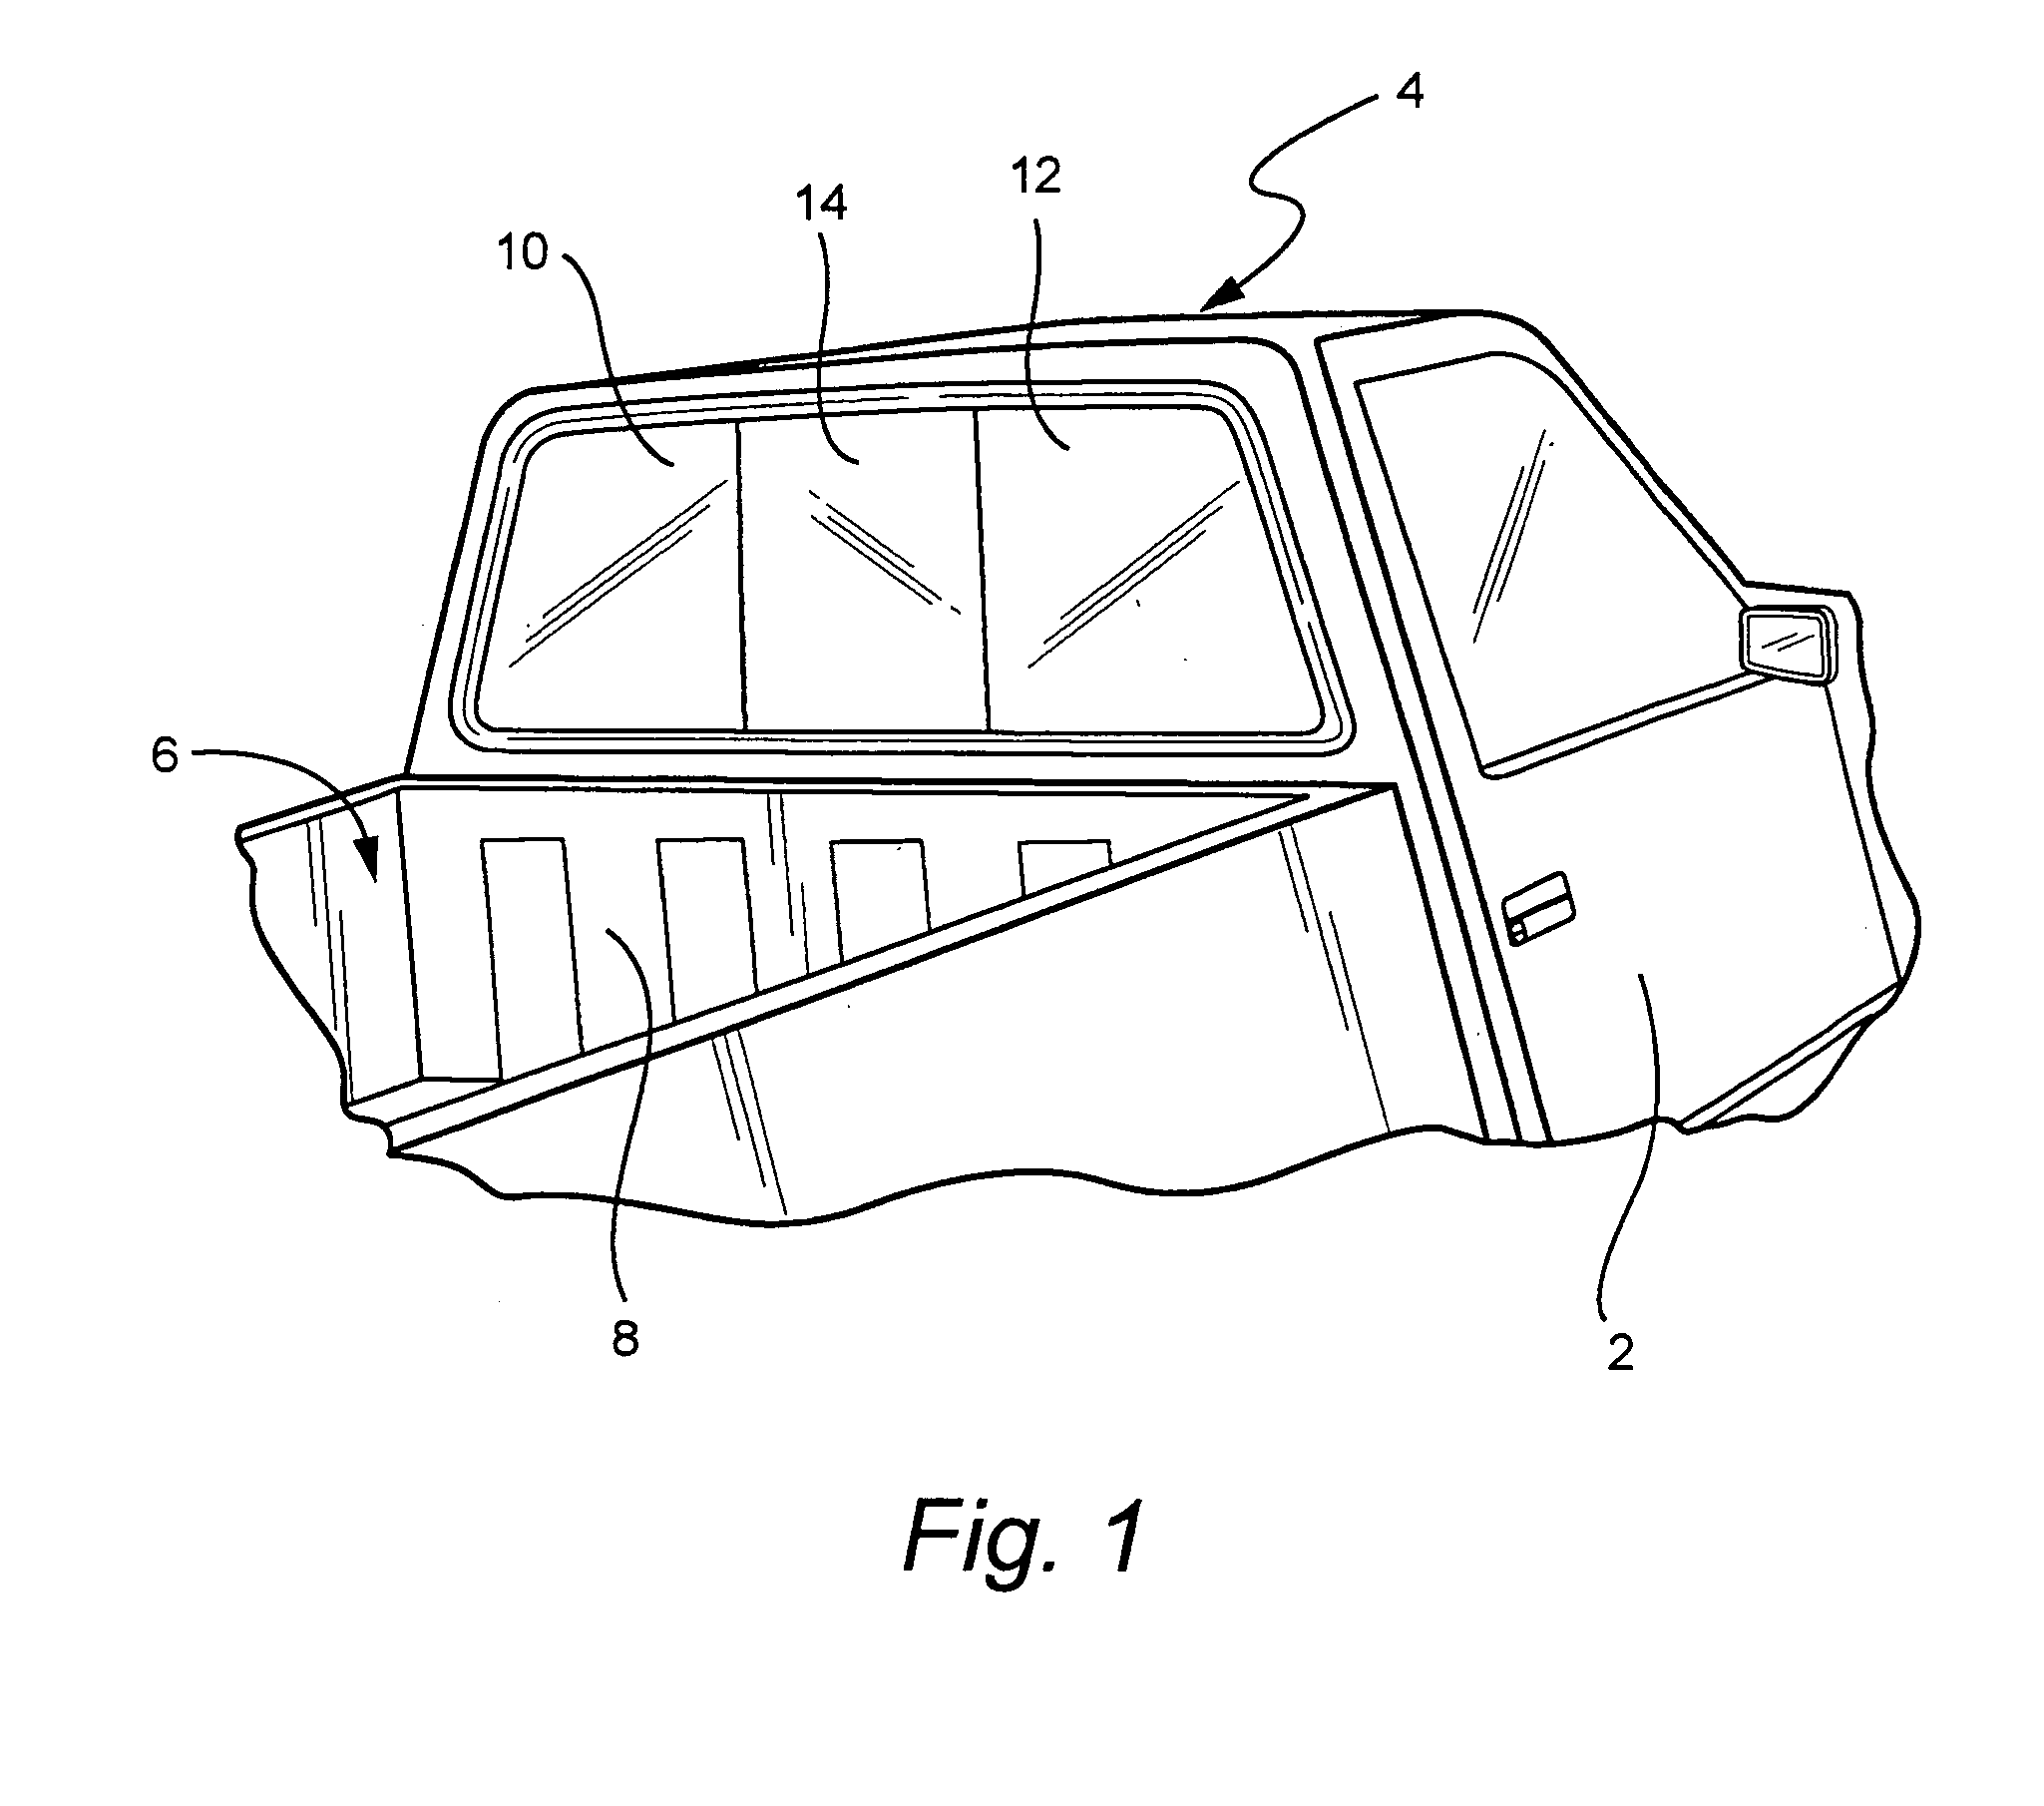 Flush-mounted slider window for pick-up truck including seal carrier, bulb seal and/or applique